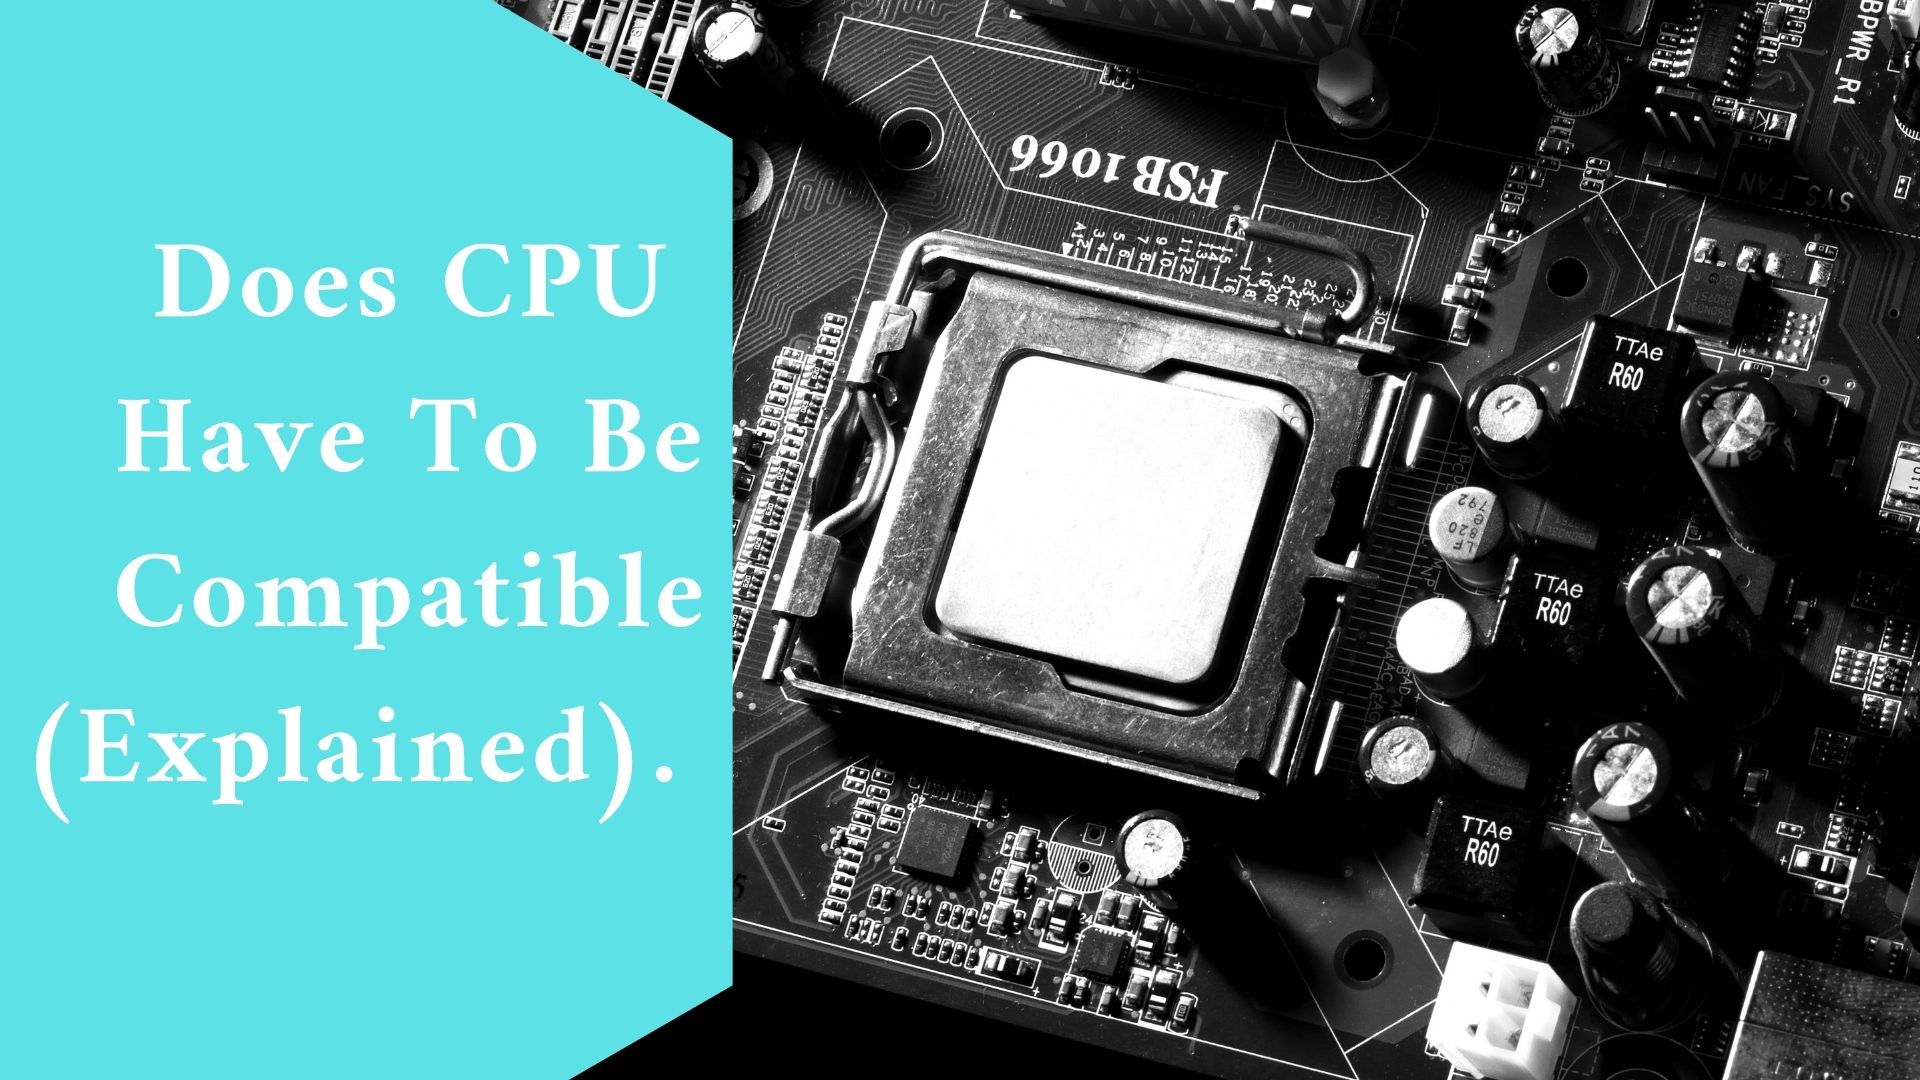 Does CPU Have To Be Compatible (Explained)